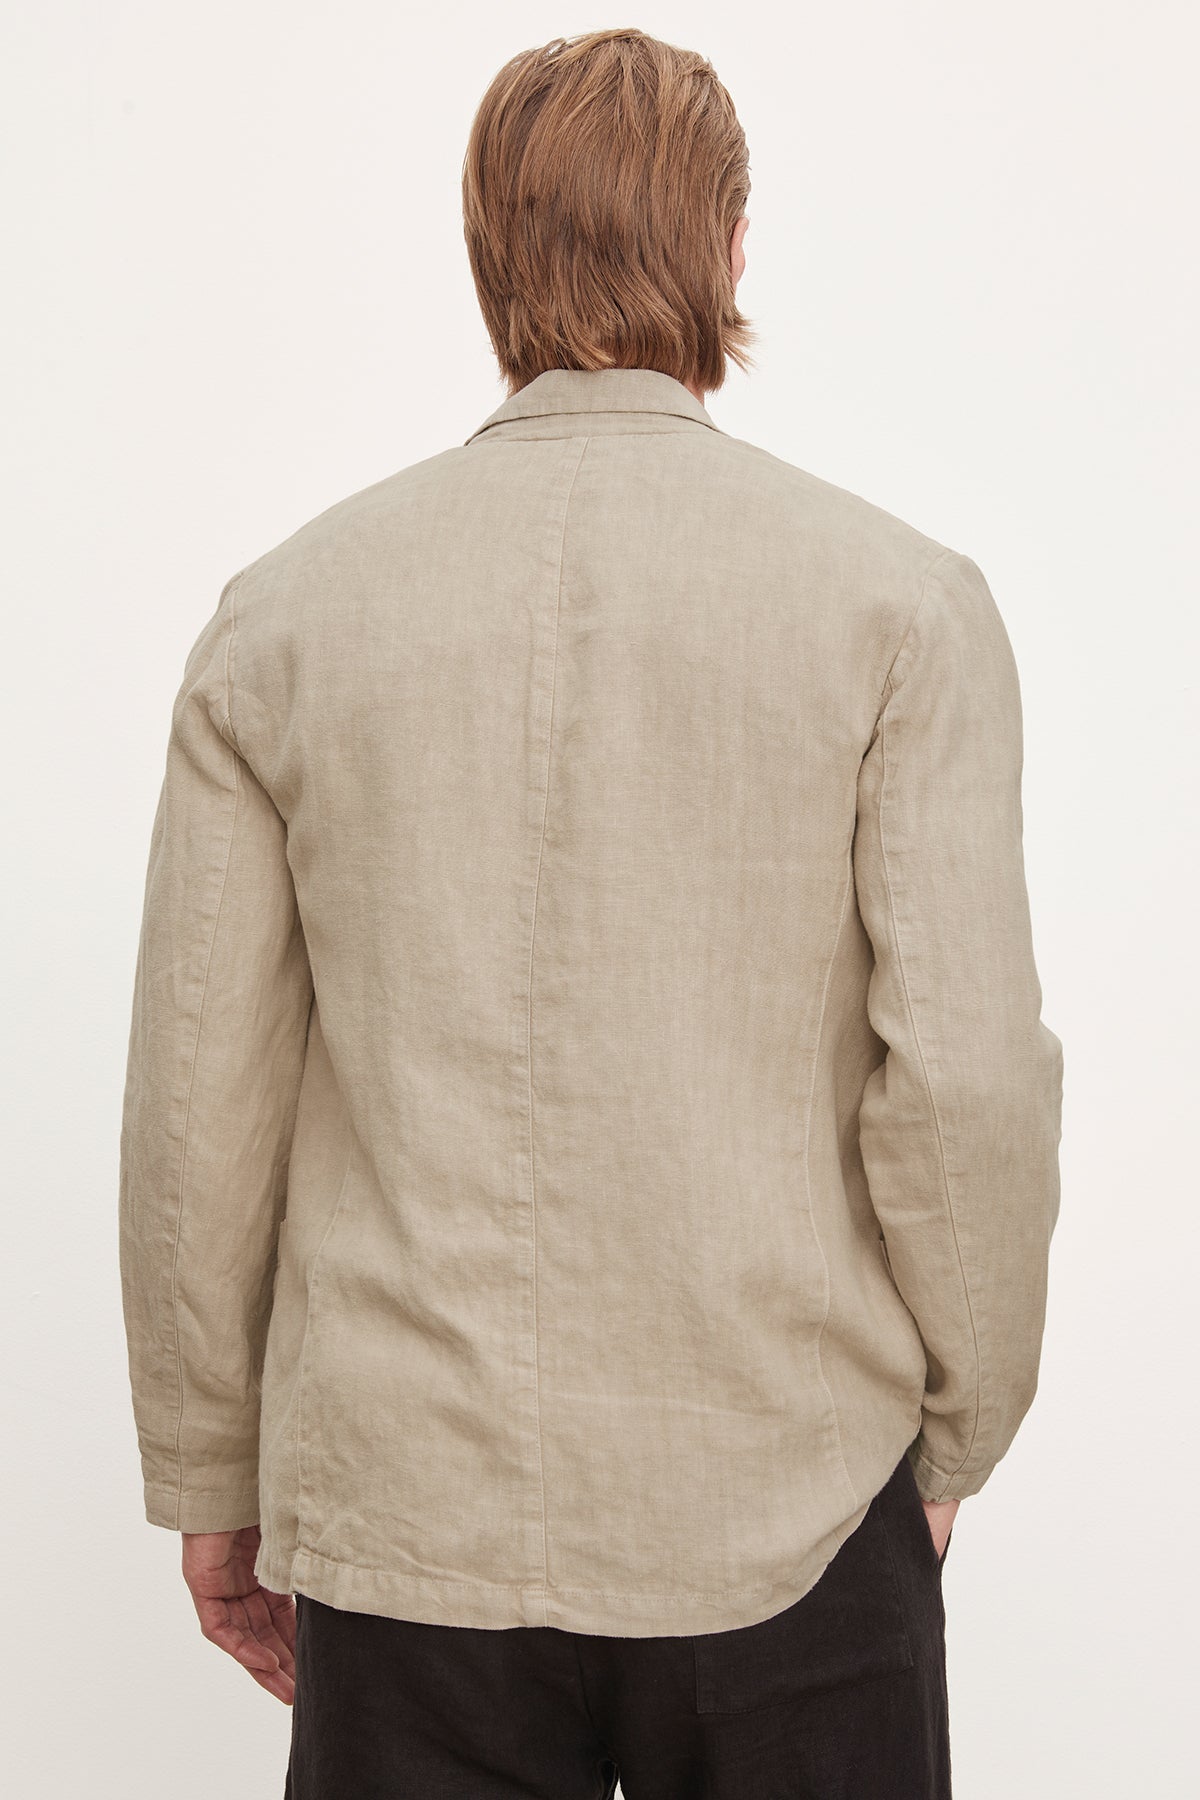   A man viewed from behind, wearing a beige tailored fit linen blazer by Velvet by Graham & Spencer and dark Phelan Linen Pants, standing against a plain white background. 